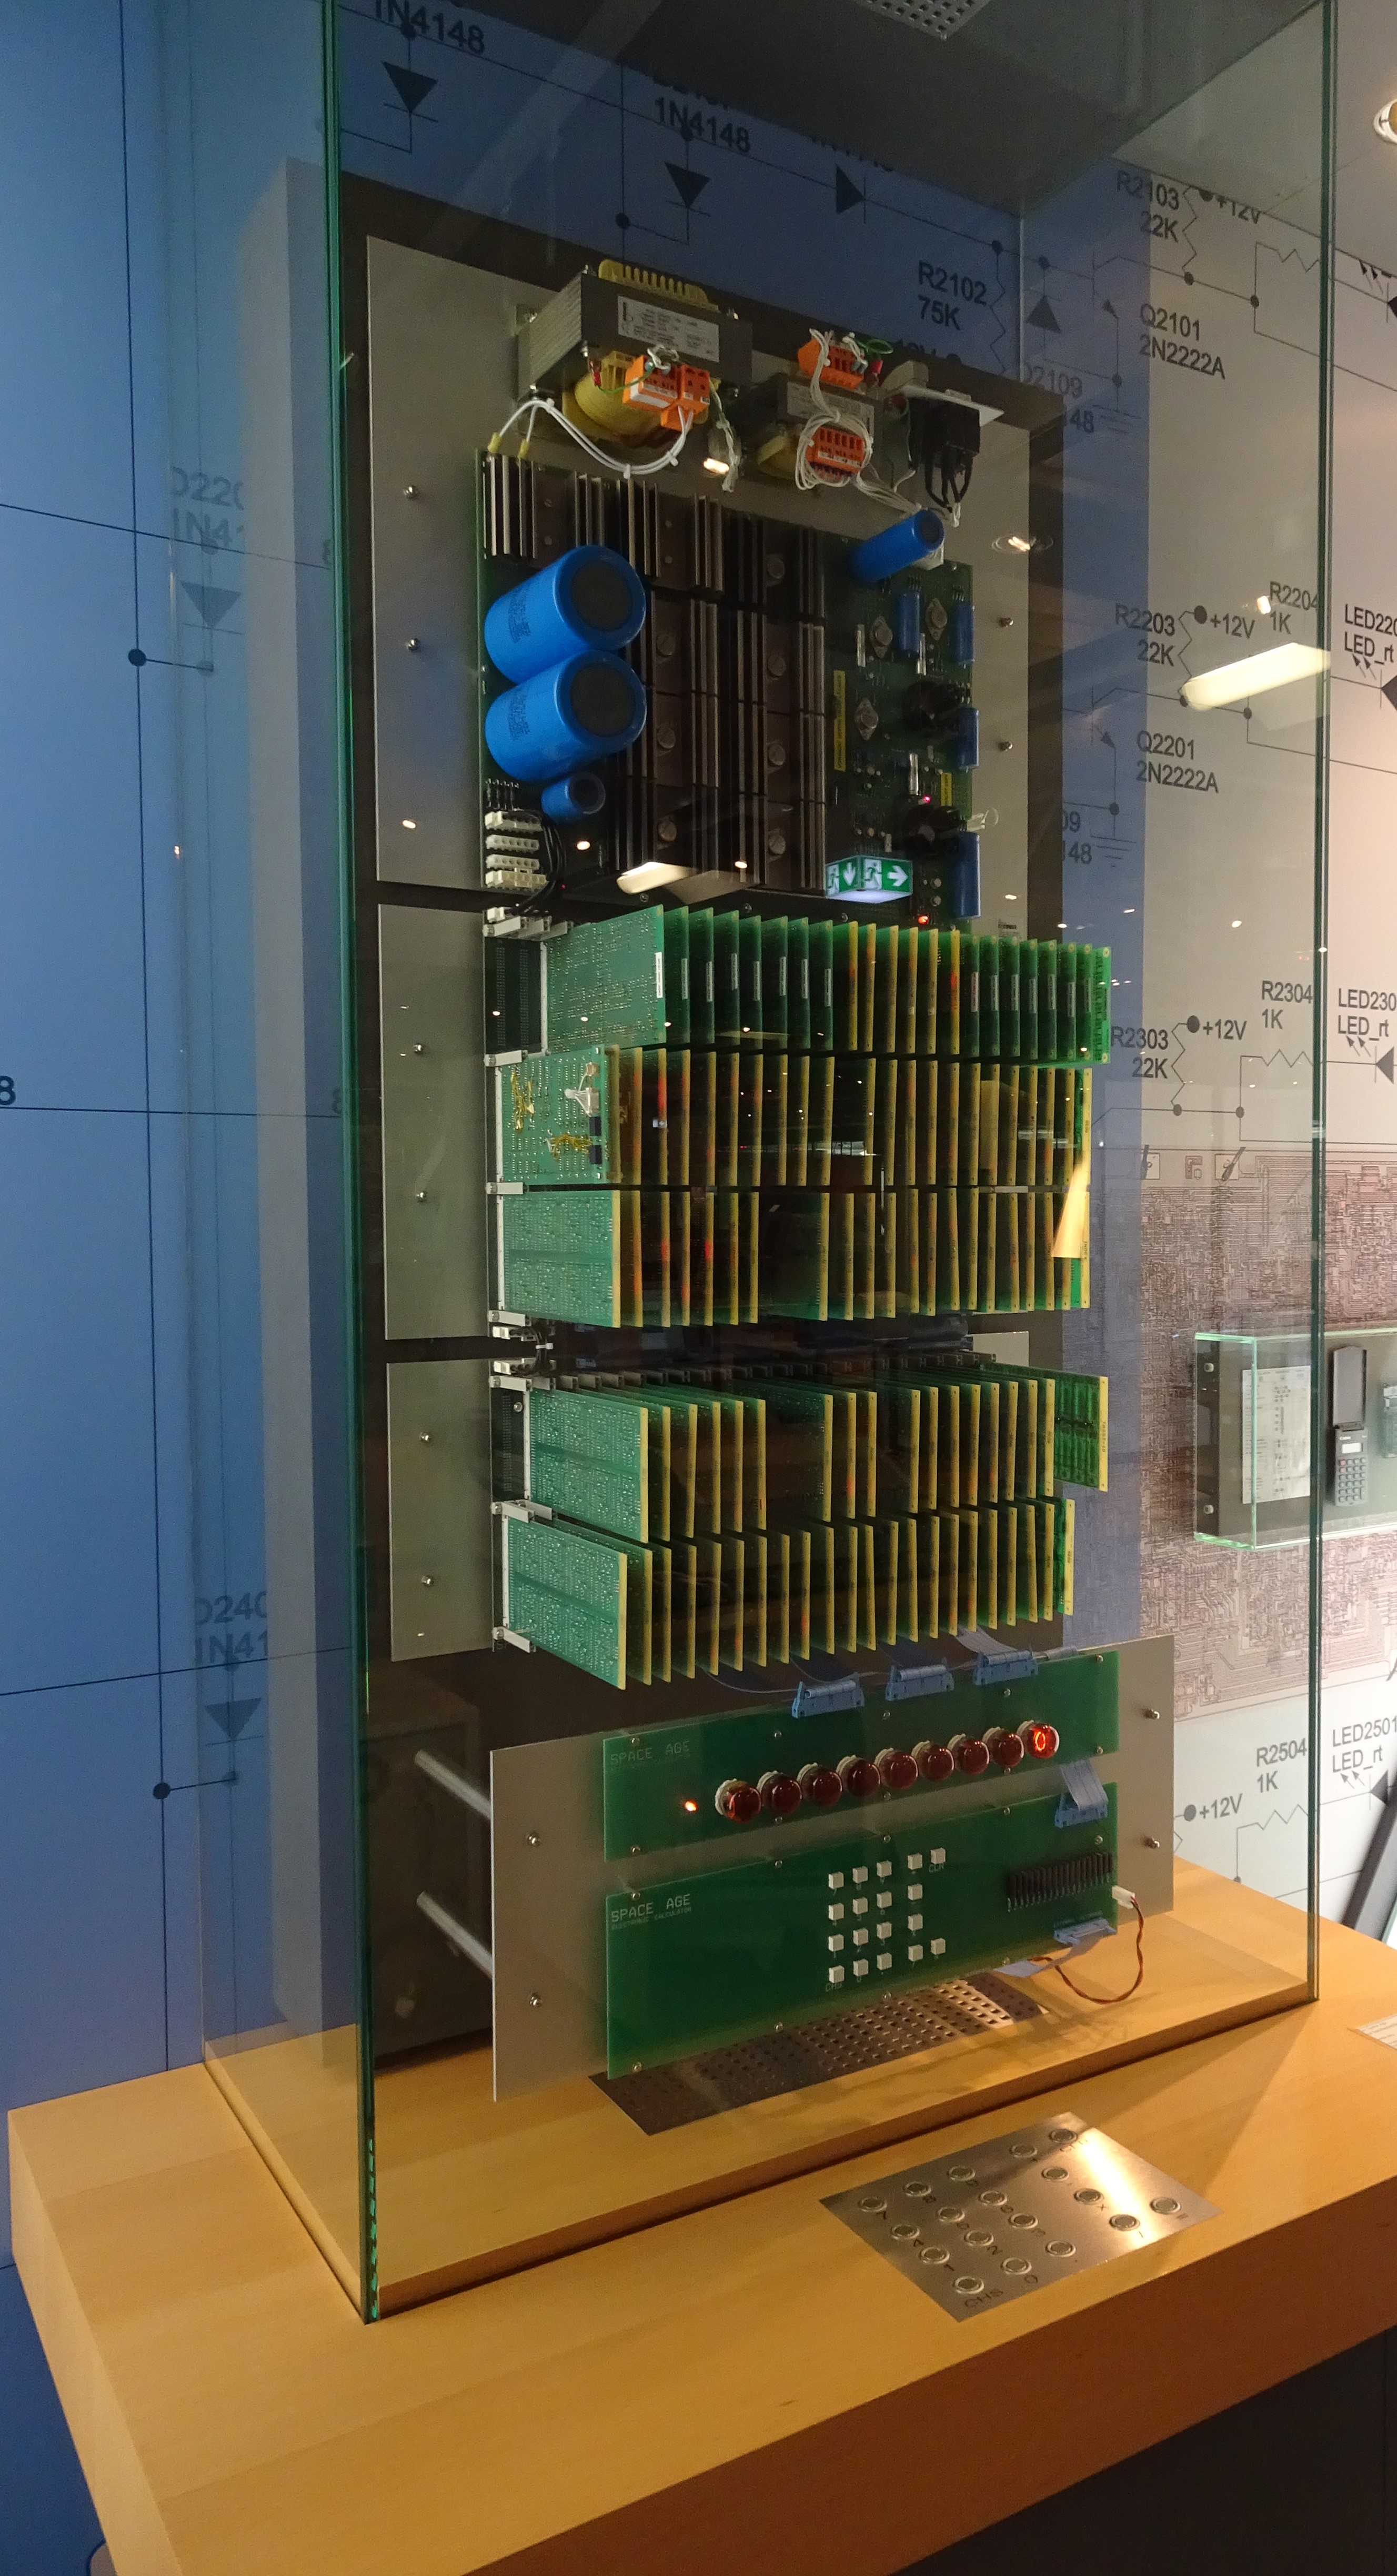 A calculator made of many circuit boards in a glass display case